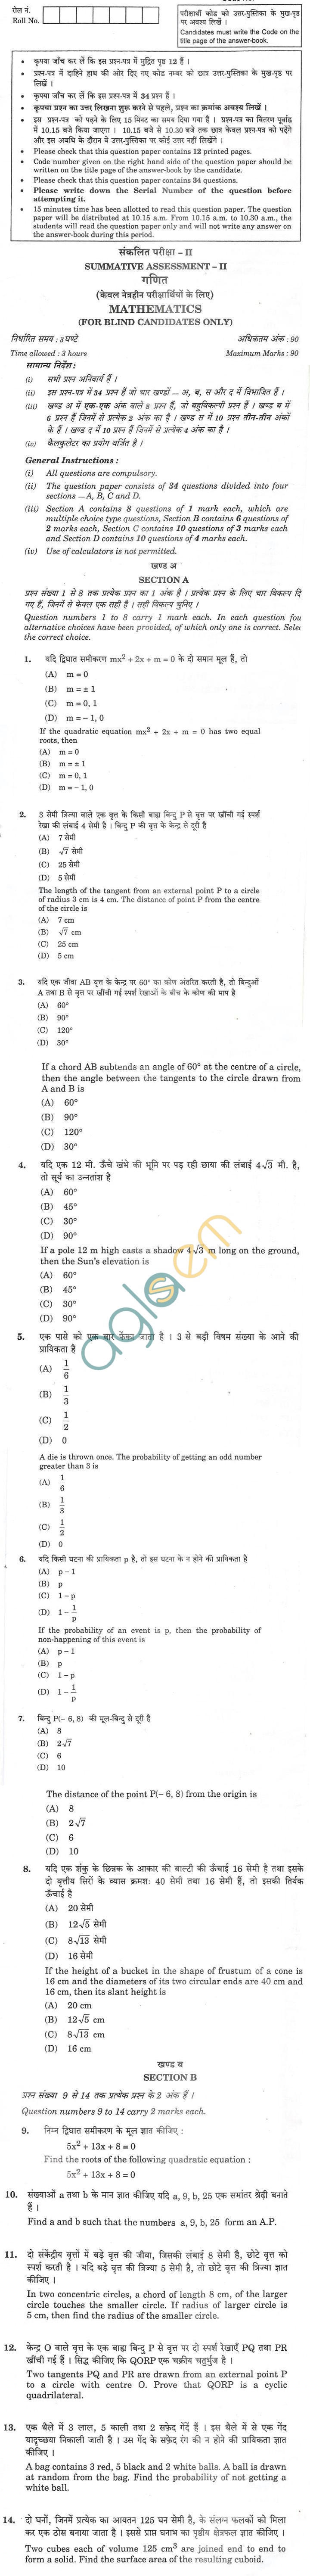 CBSE Compartment Exam 2013 Class X Question Paper - Mathematics for Blind Candidates